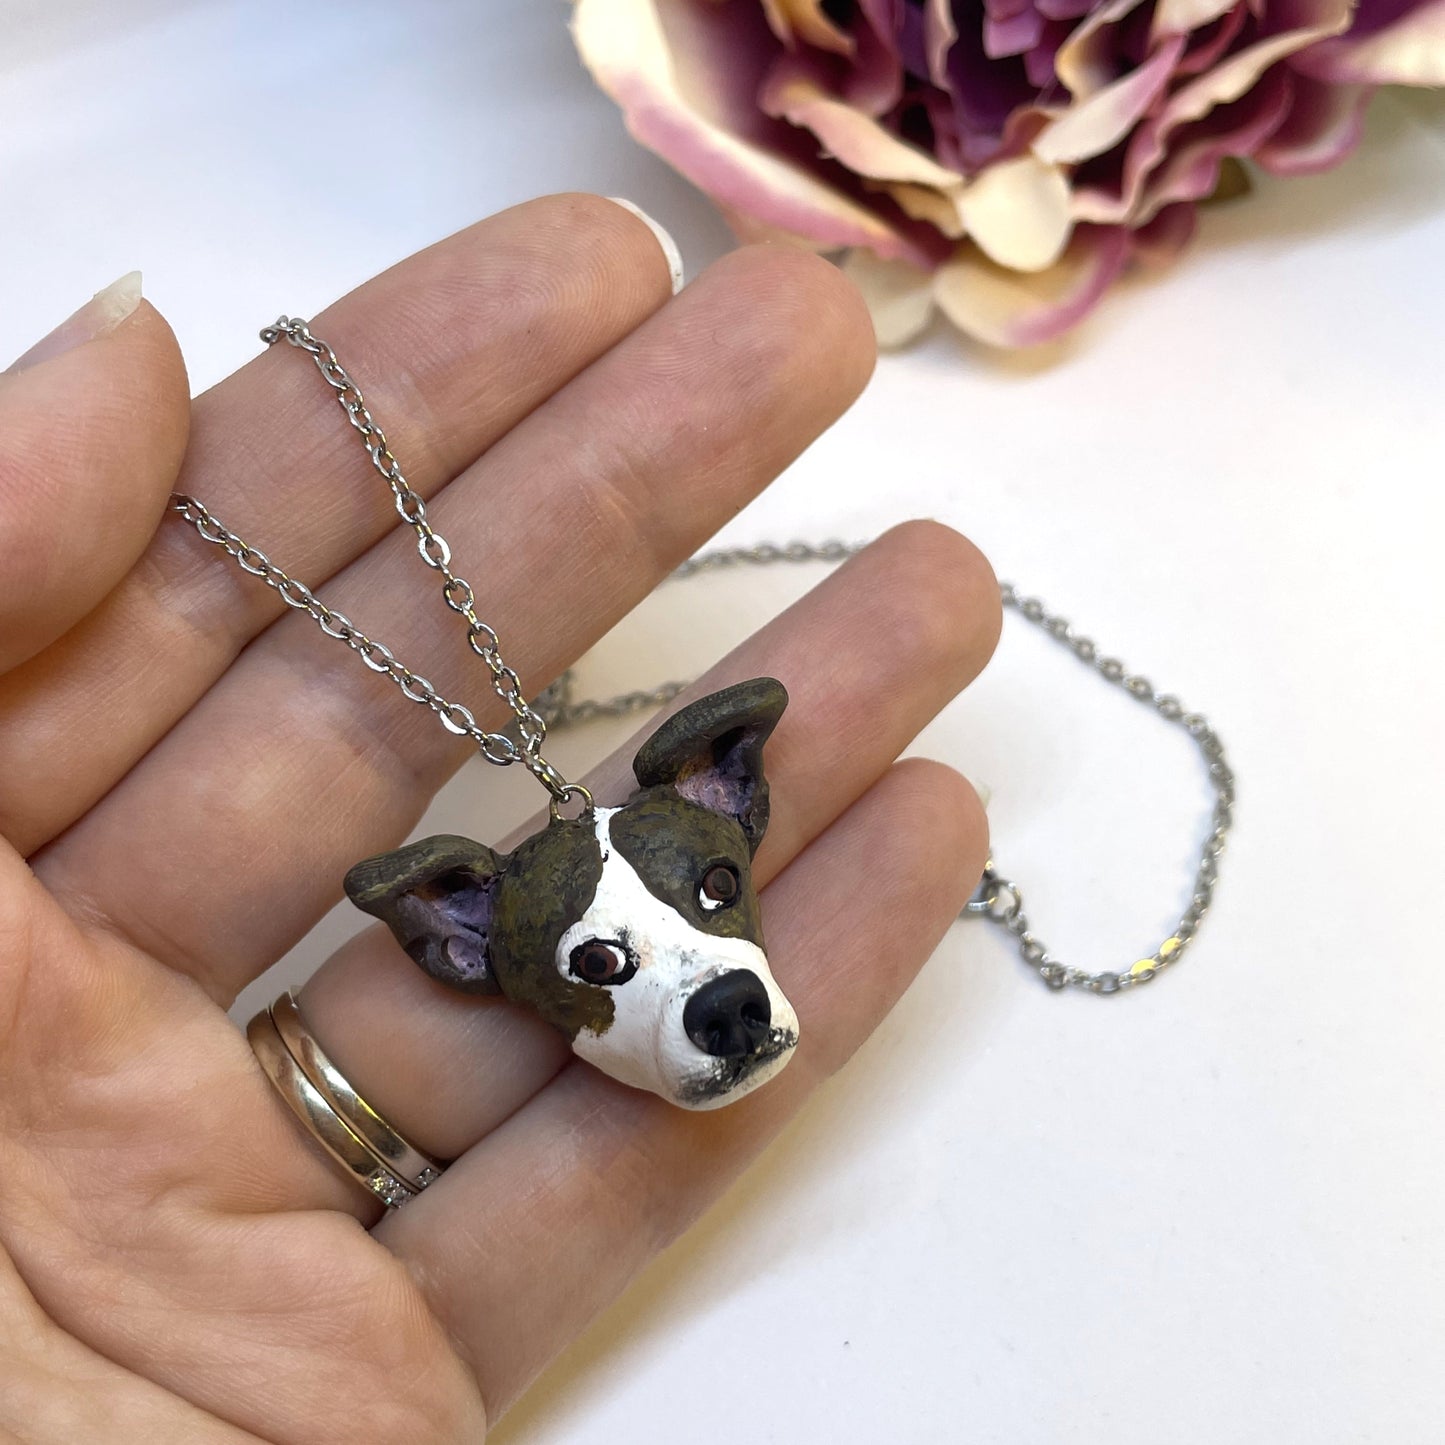 Handmade custom brown and white dog necklace pendant on chain held in front of faux pink flower.